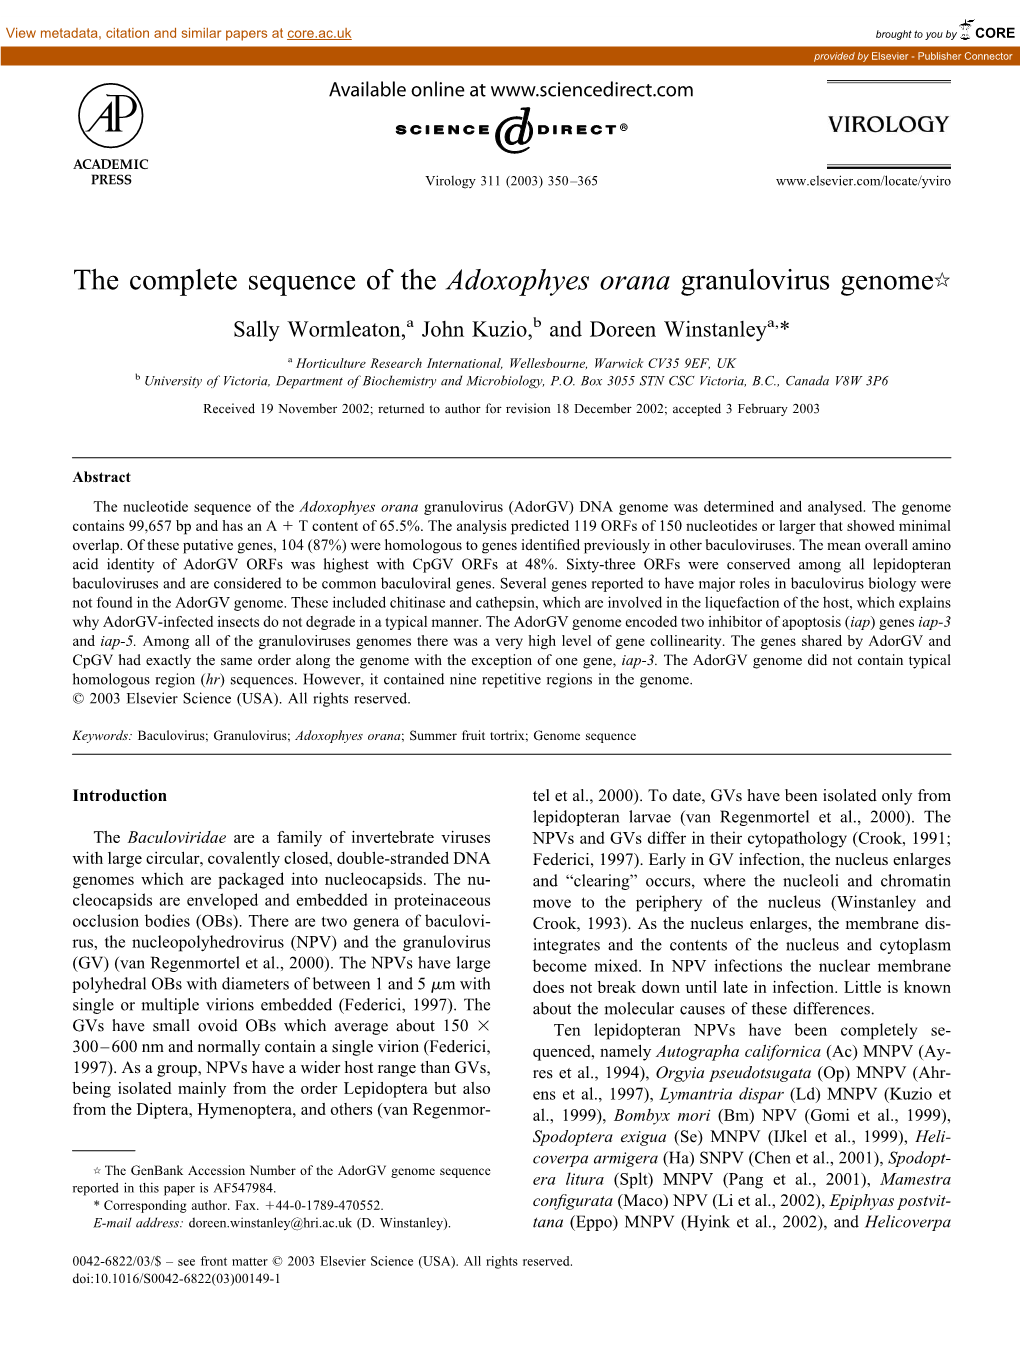 The Complete Sequence of the Adoxophyes Orana Granulovirus Genome૾